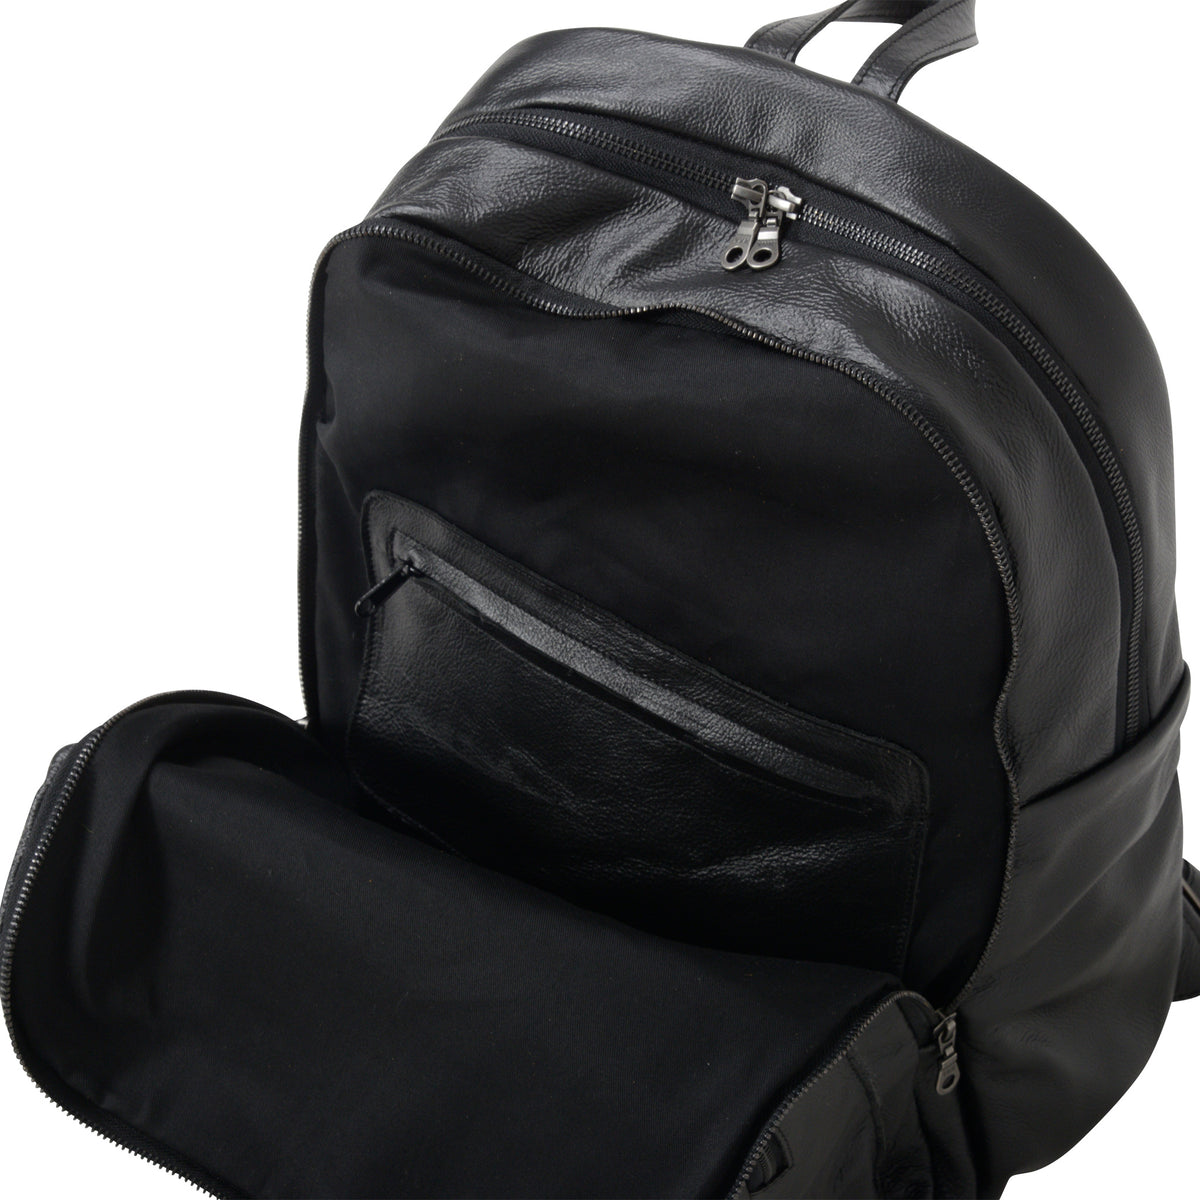 Leather 15 Inch Business backpack